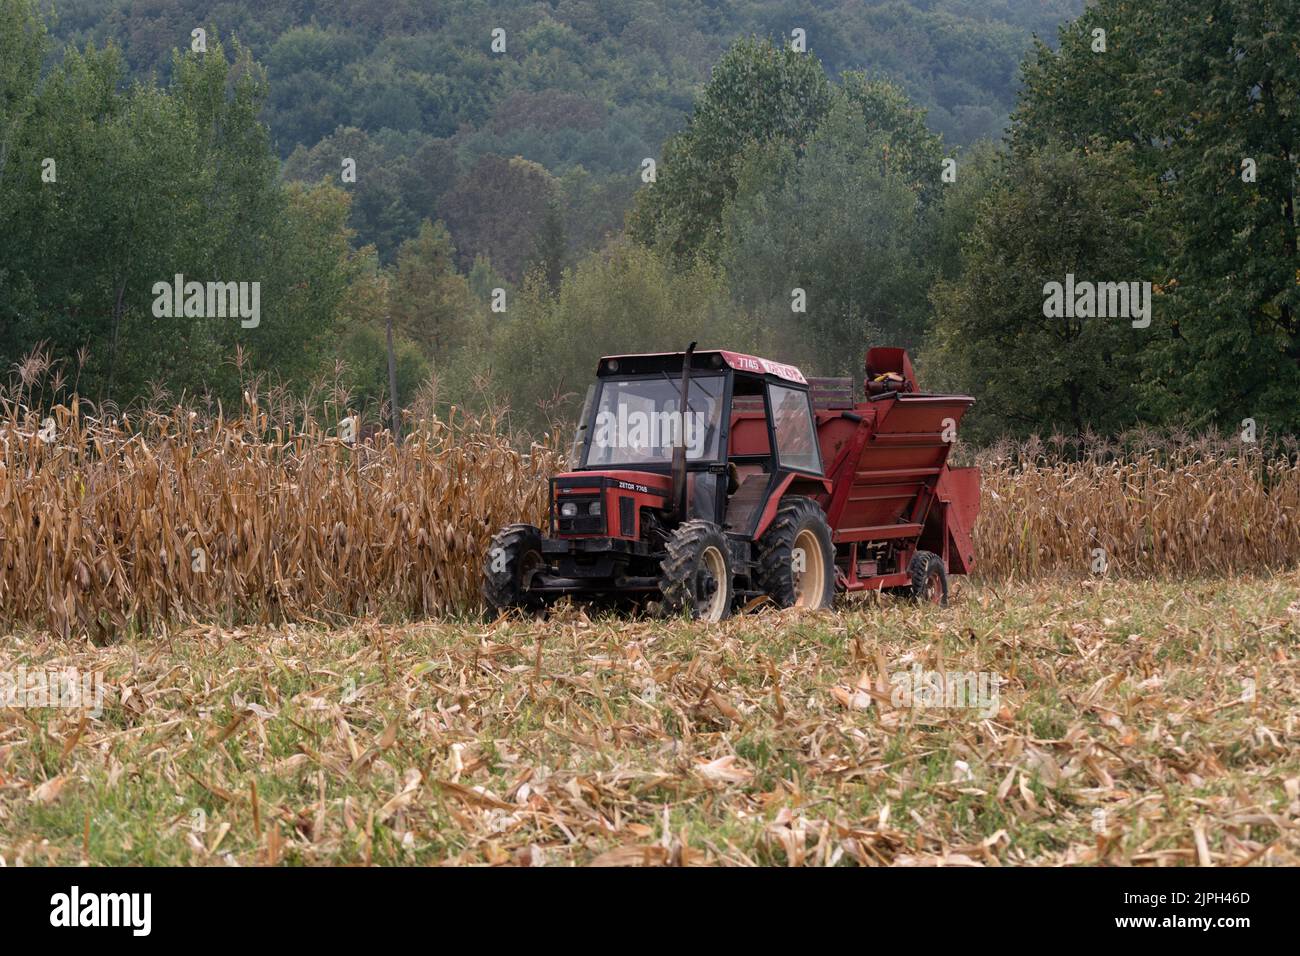 A tractor pulls a corn harvester and picks dry ripe corn in the field, an agricultural tractor attachment and field work in the fall, a field full of Stock Photo